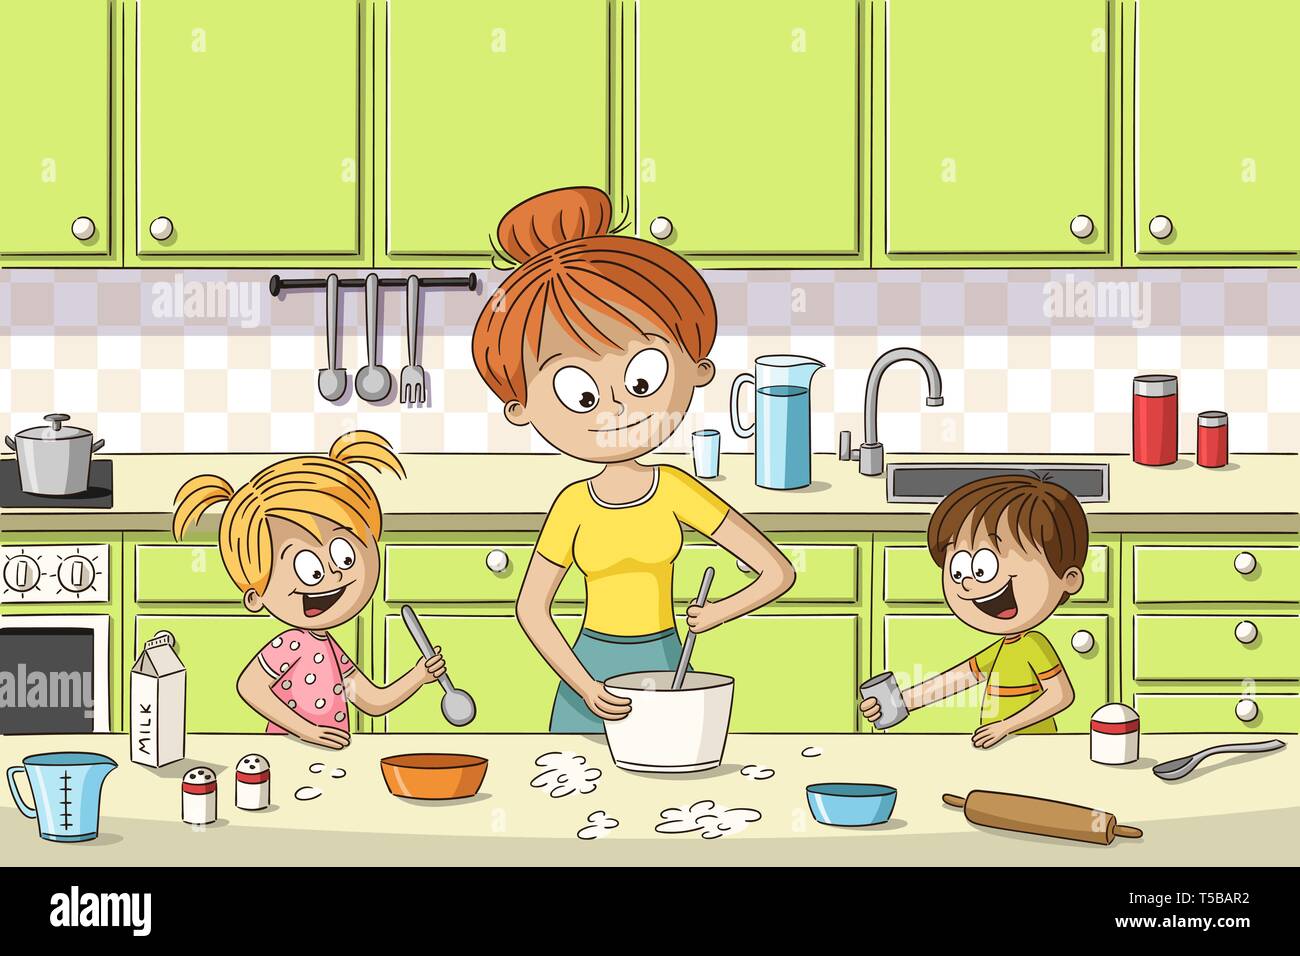 https://c8.alamy.com/comp/T5BAR2/mother-is-cooking-with-her-two-children-hand-drawn-vector-illustration-T5BAR2.jpg